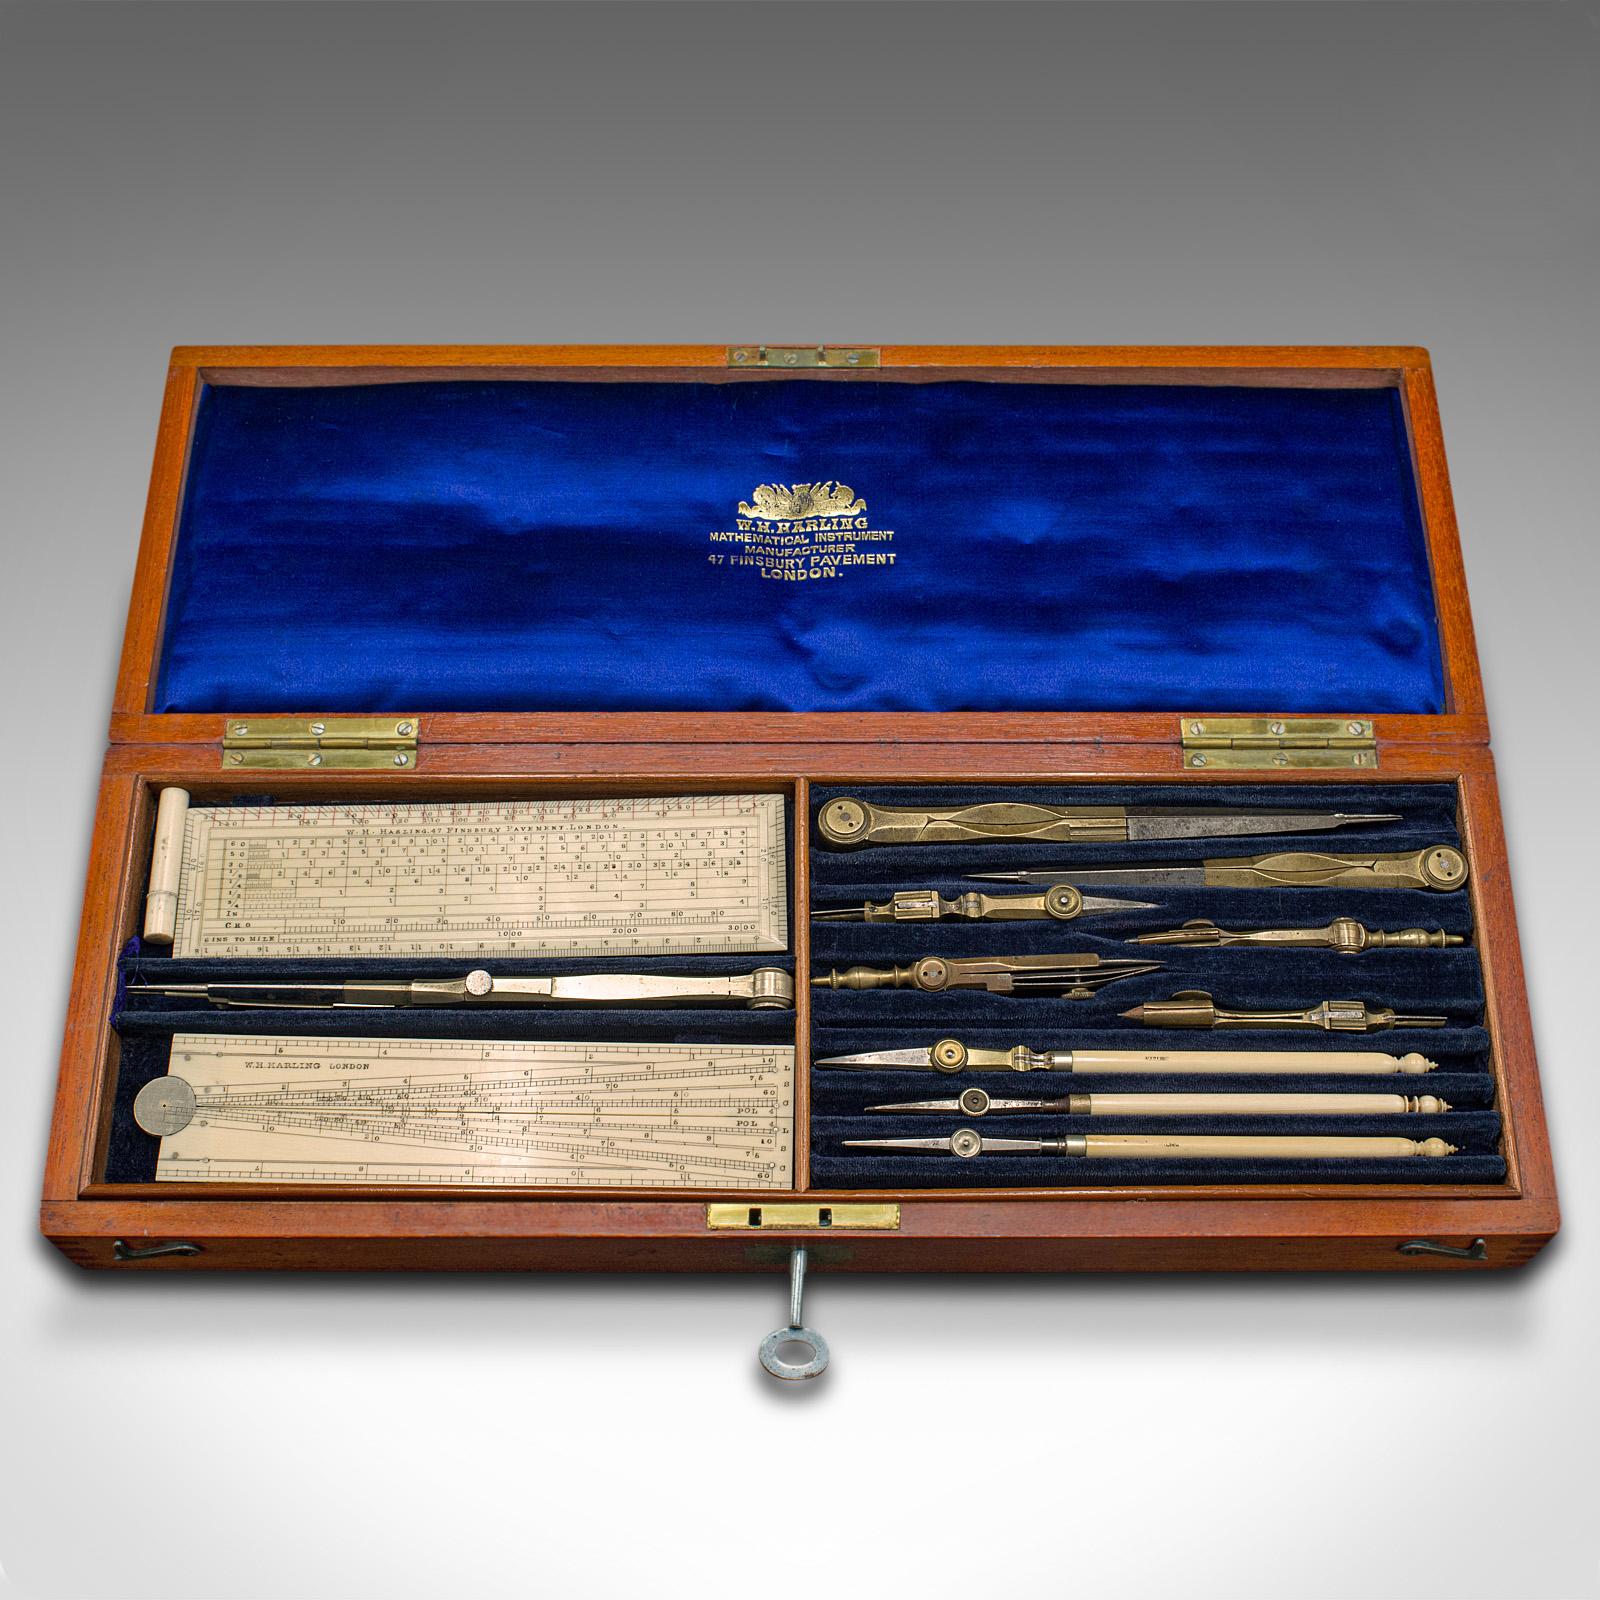 Antique Draughtsman's Tool Set, English, Cartography, Instruments, Edwardian In Good Condition For Sale In Hele, Devon, GB